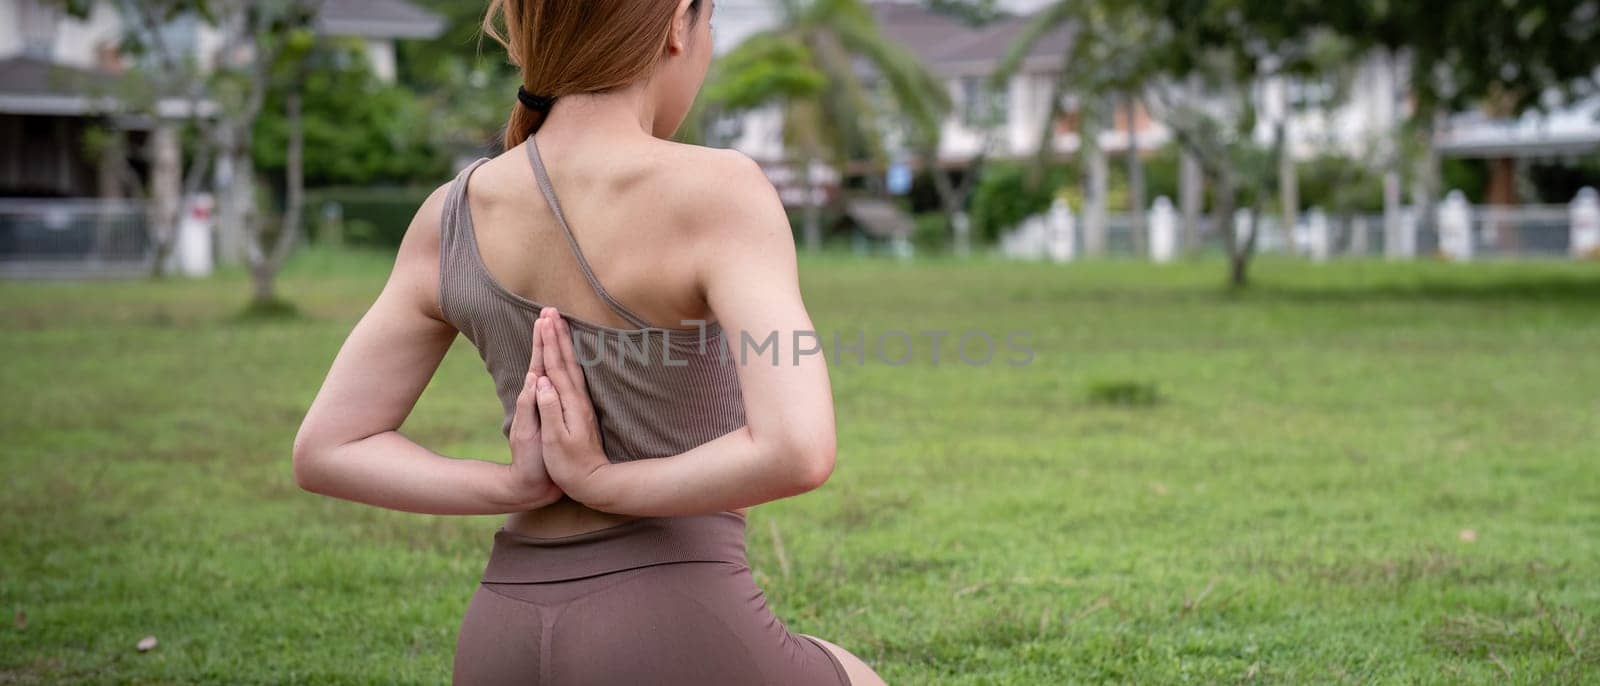 Woman Practice Yoga in Park. Healthy Lifestyle, Outdoor Fitness, Stretching Exercise, Wellness Activity, Peaceful Mindfulness, Natural Environment, Active Living, Back View, Tranquil Setting by nateemee